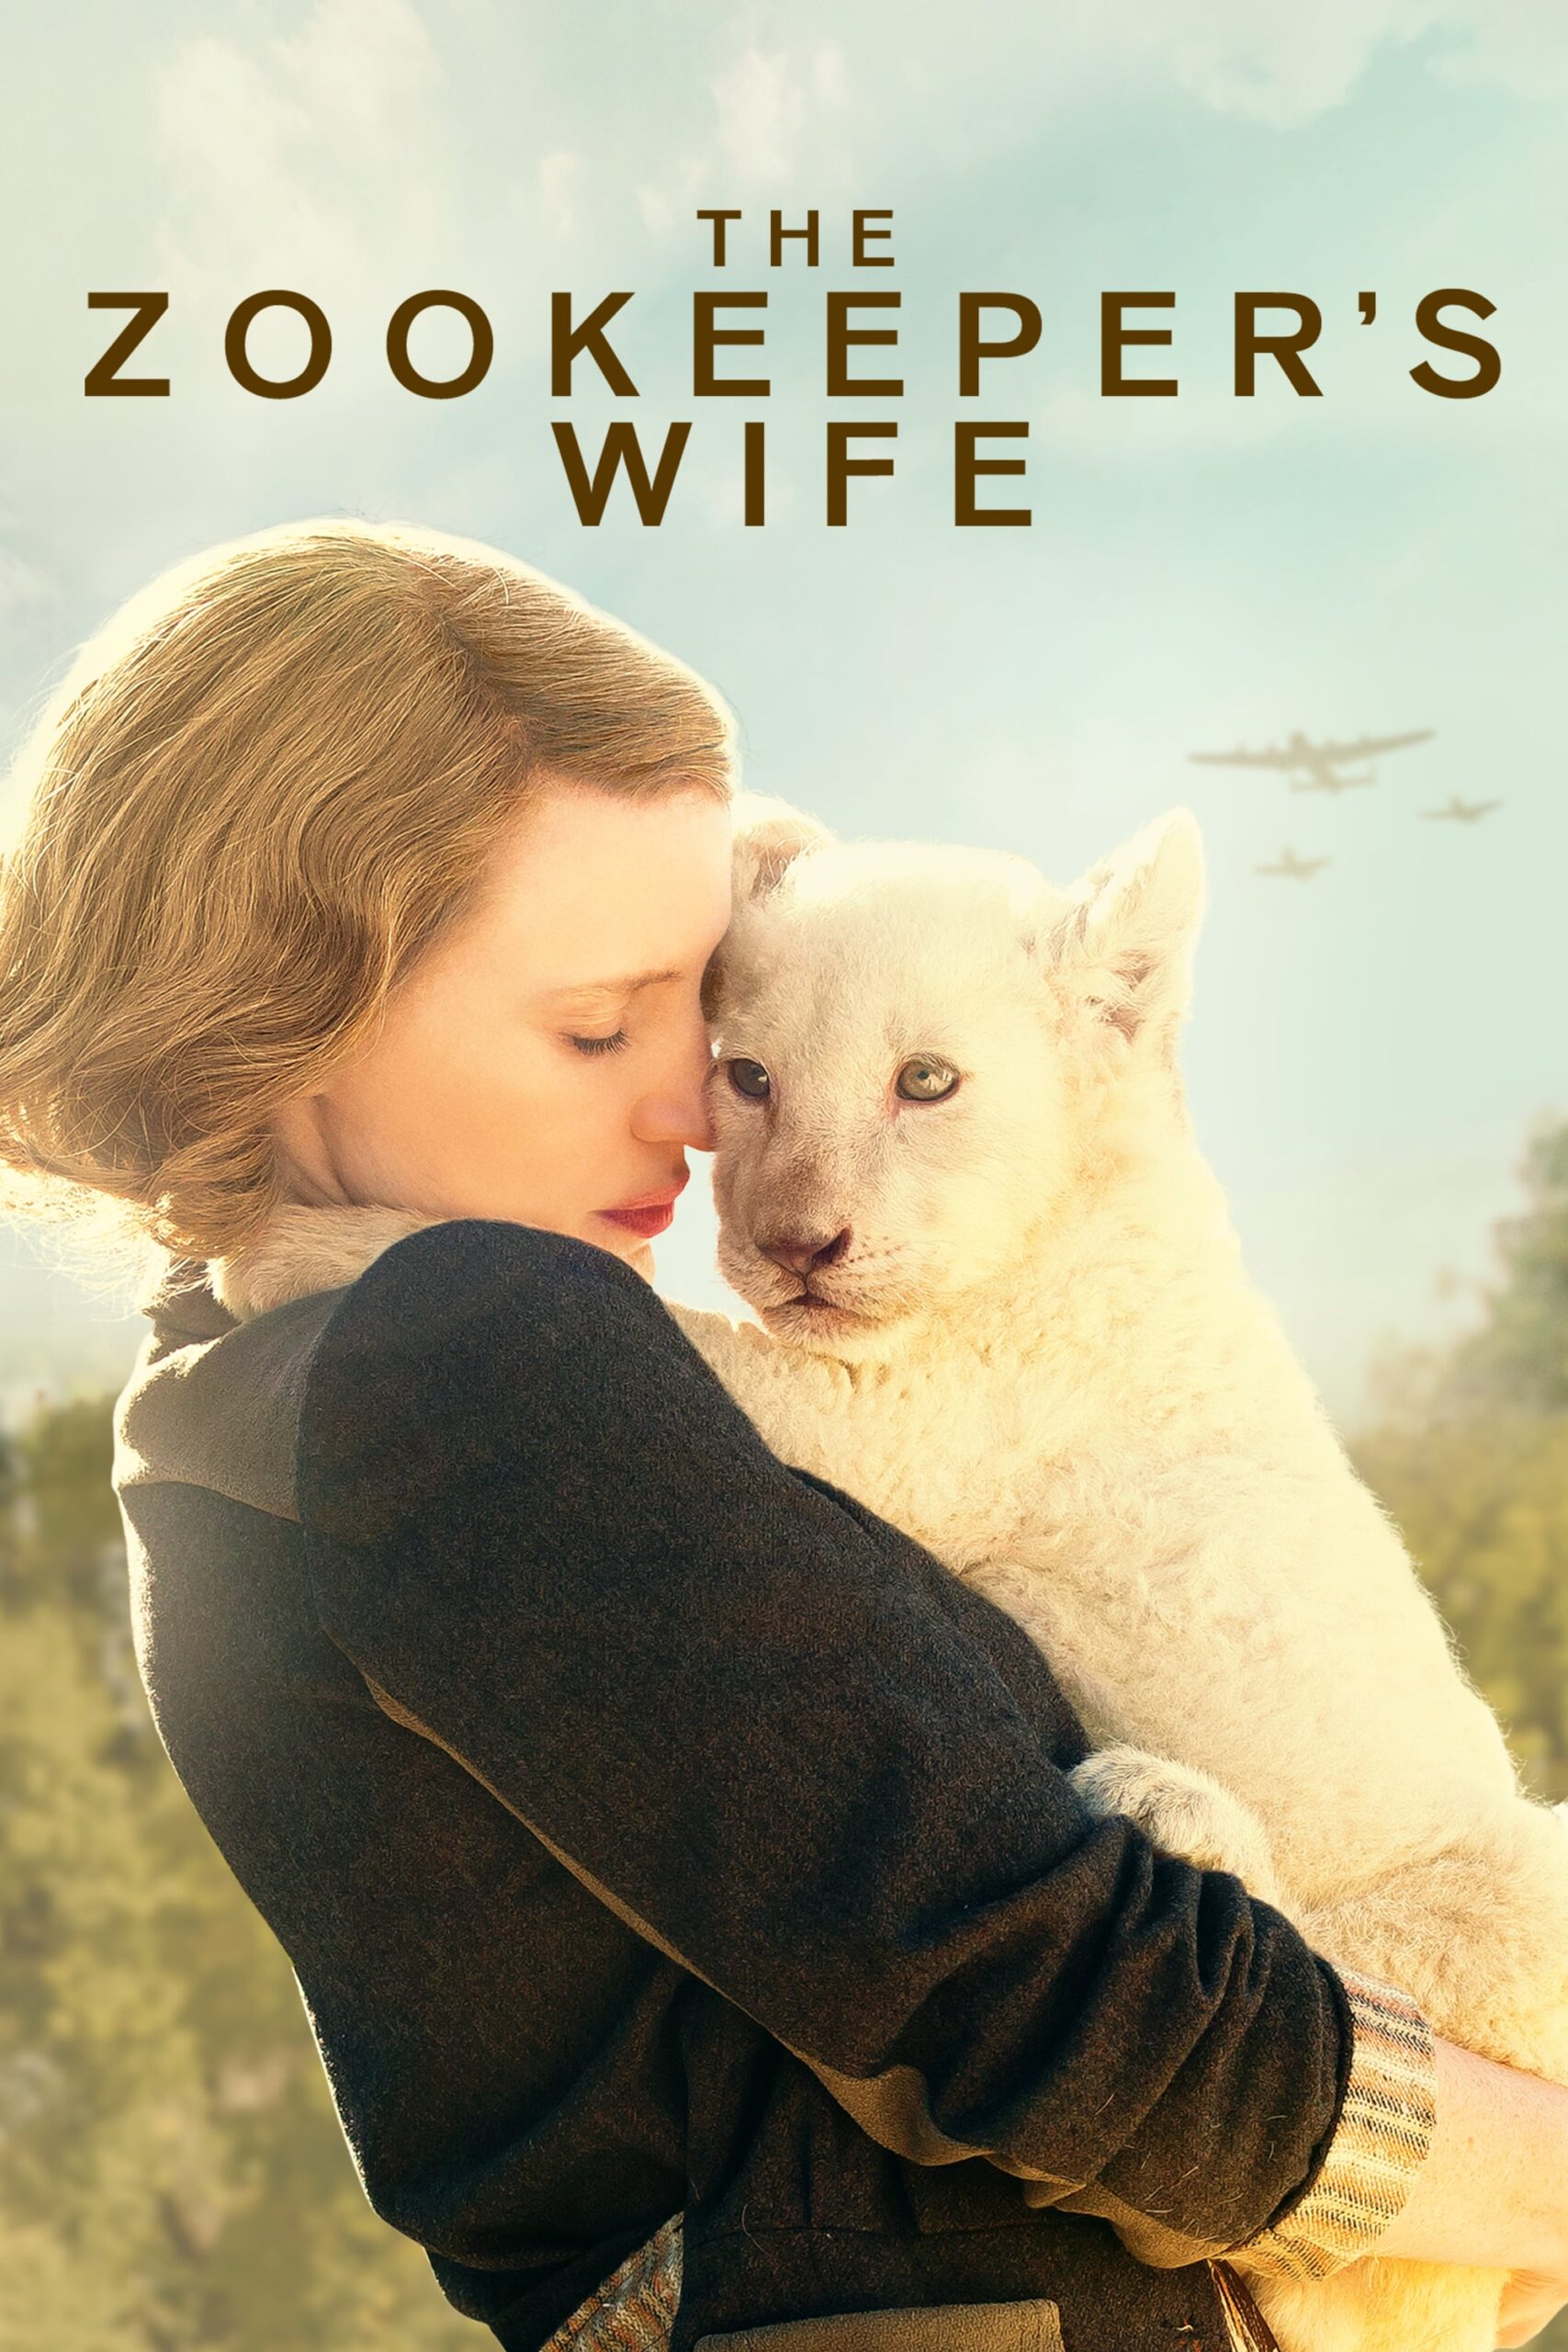 Poster for the movie "The Zookeeper's Wife"